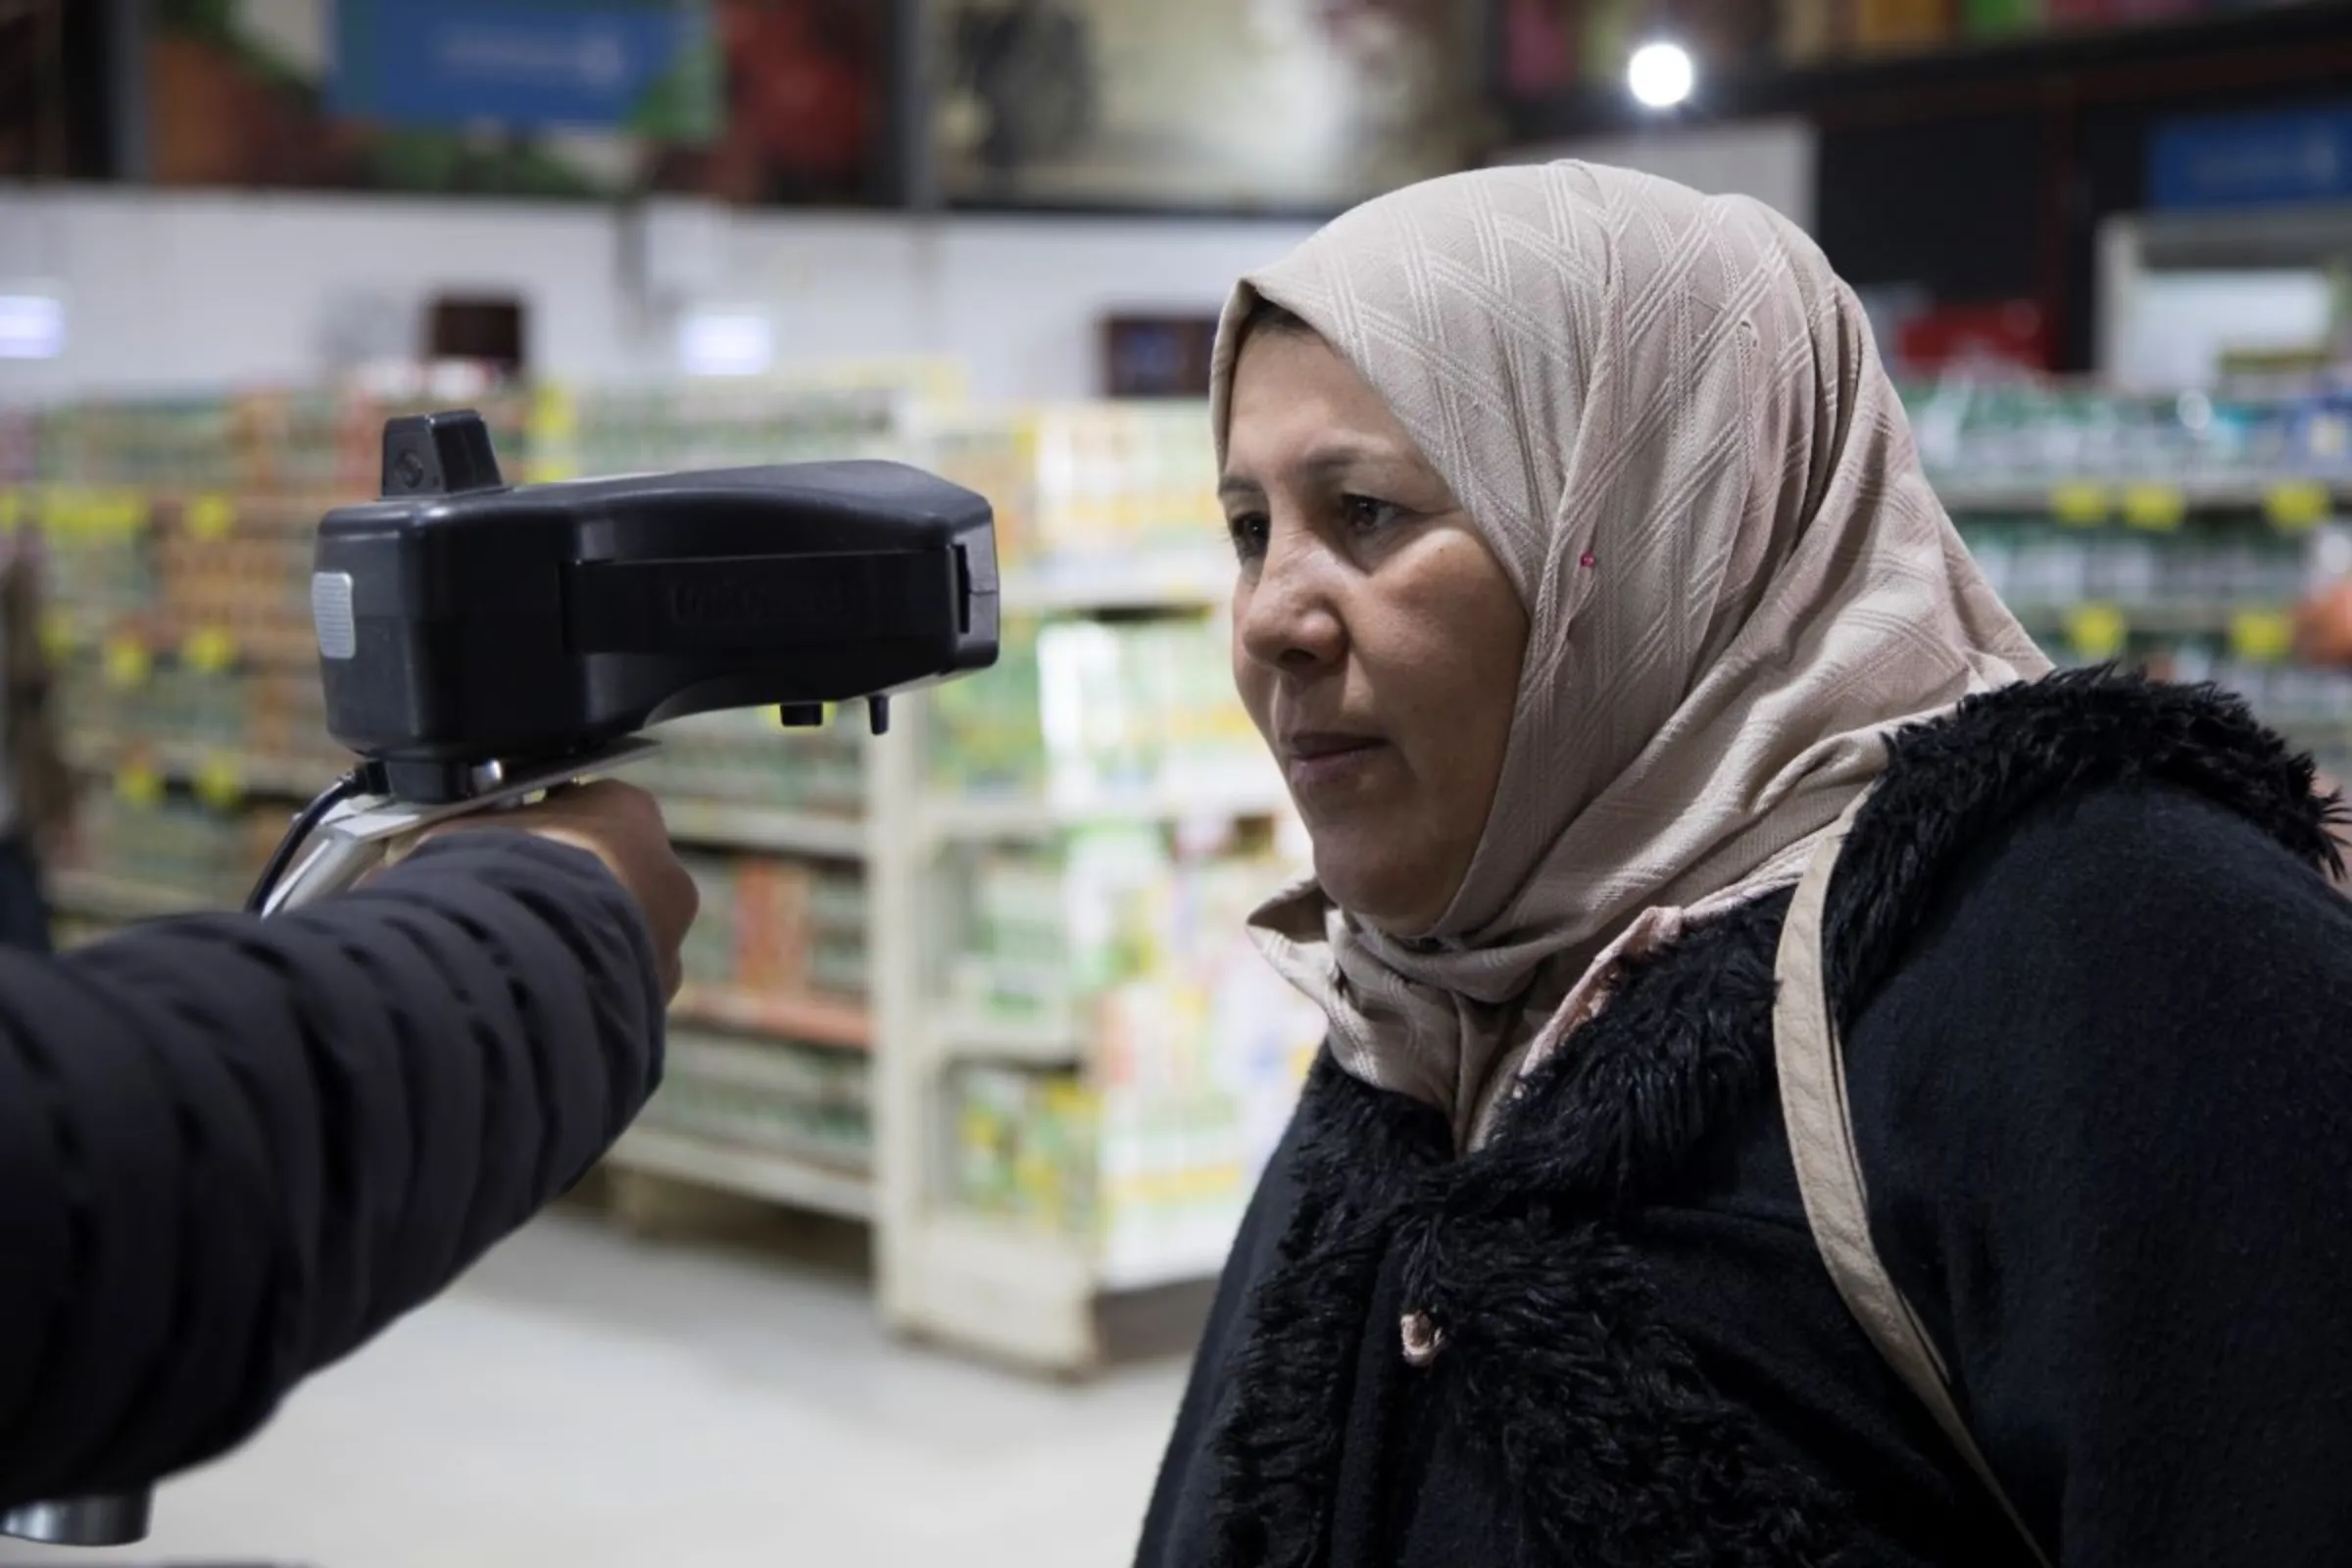 Sameera Sabbouh ,40, uses an iris scanner to pay for her grocery shopping in Sameh Mall, in Azraq, Jordan. November 27, 2022